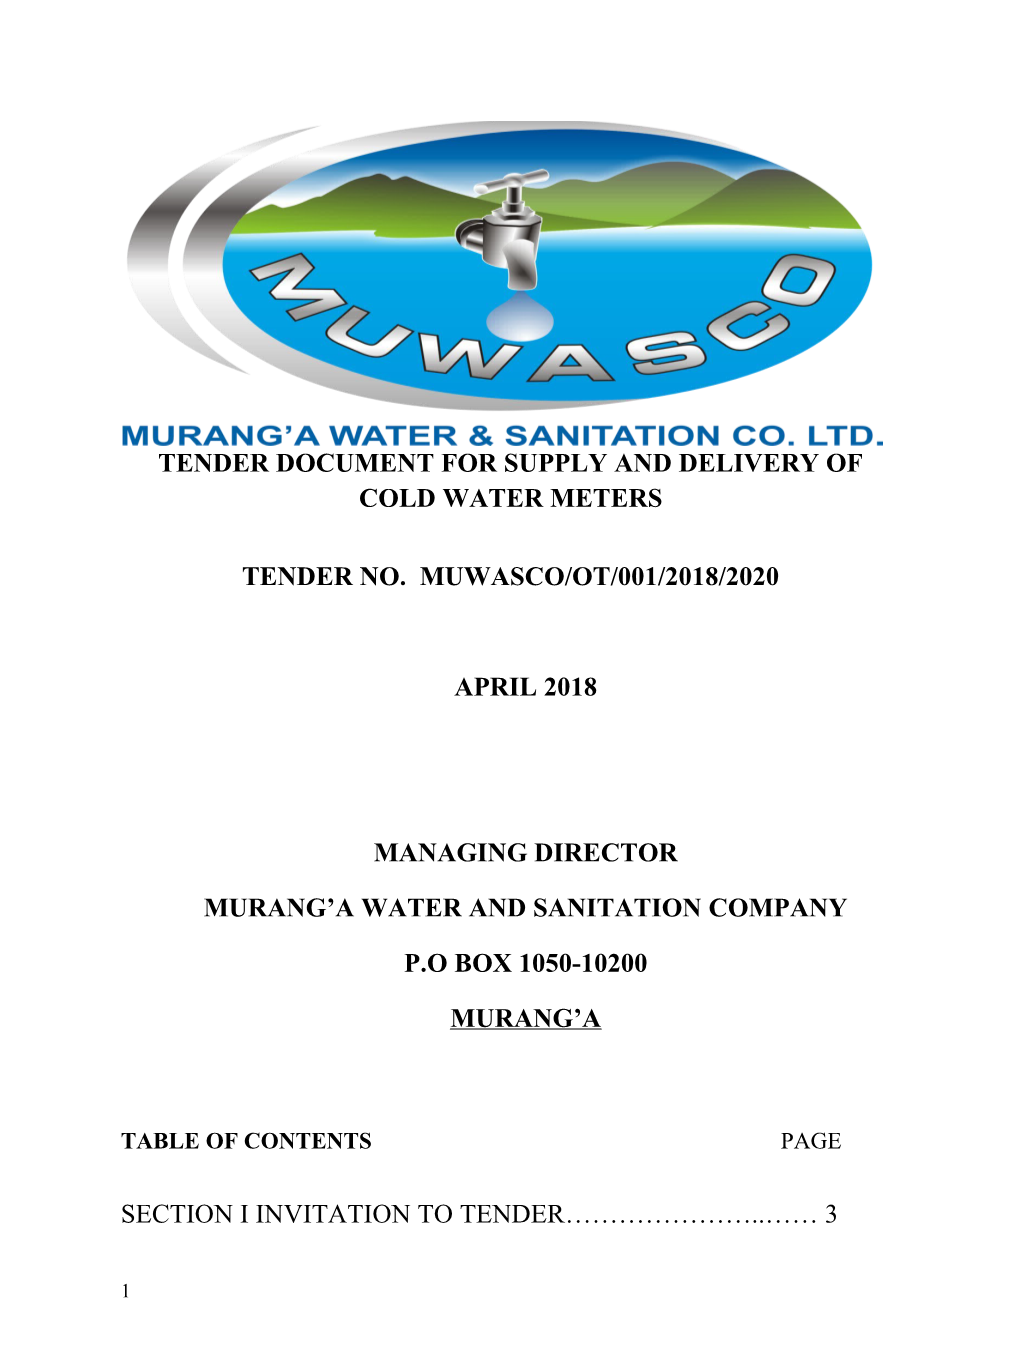 Tender Document for Supply and Delivery of Cold Water Meters